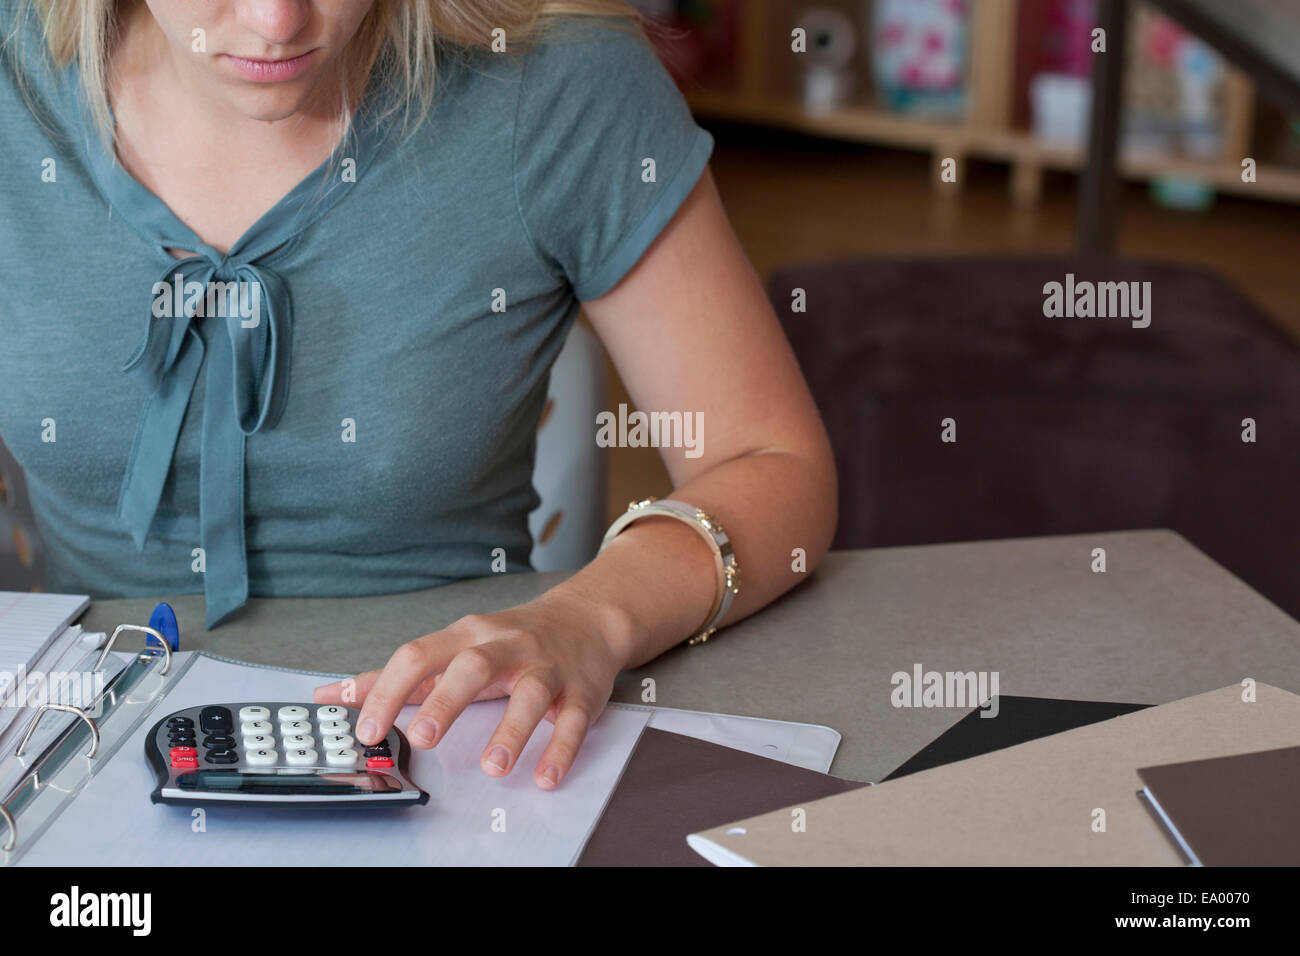 Cropped image of sales assistant using calculator in stationery shop Stock Photo